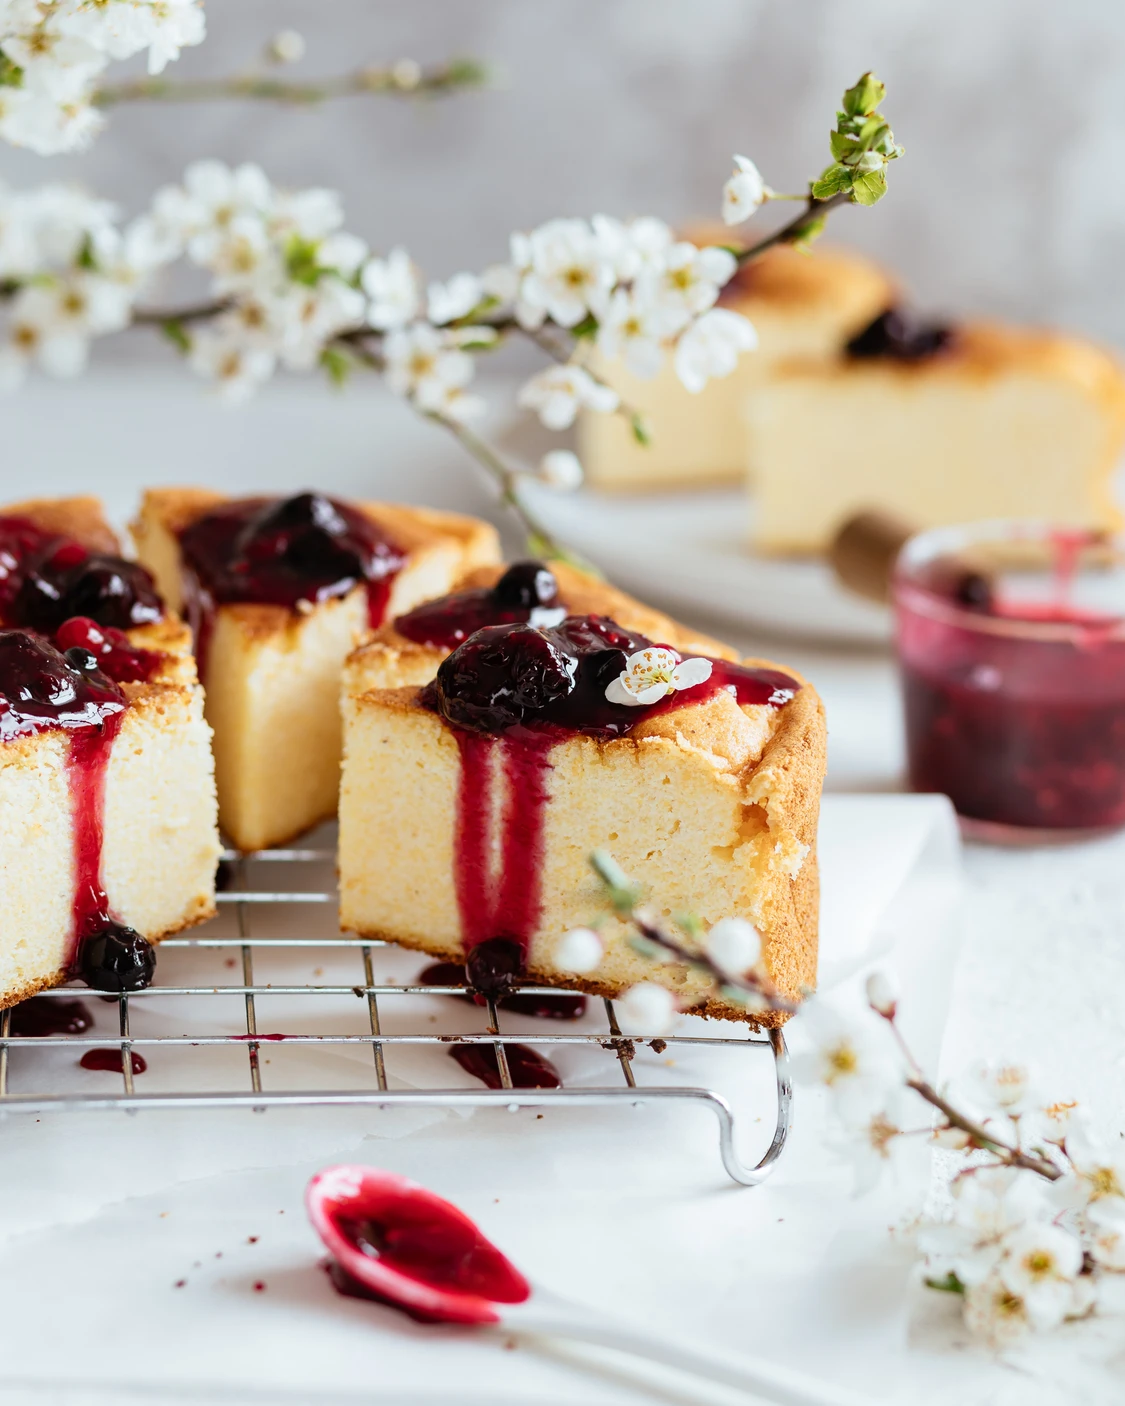 Russian cottage cheese pie on a table. On the table, on a lattice under flowering cherry branches, there are slices of cottage cheese casserole. Cherry sauce on top of the casserole. It drains. In the foreground lies a spoon smeared in cherry sauce.